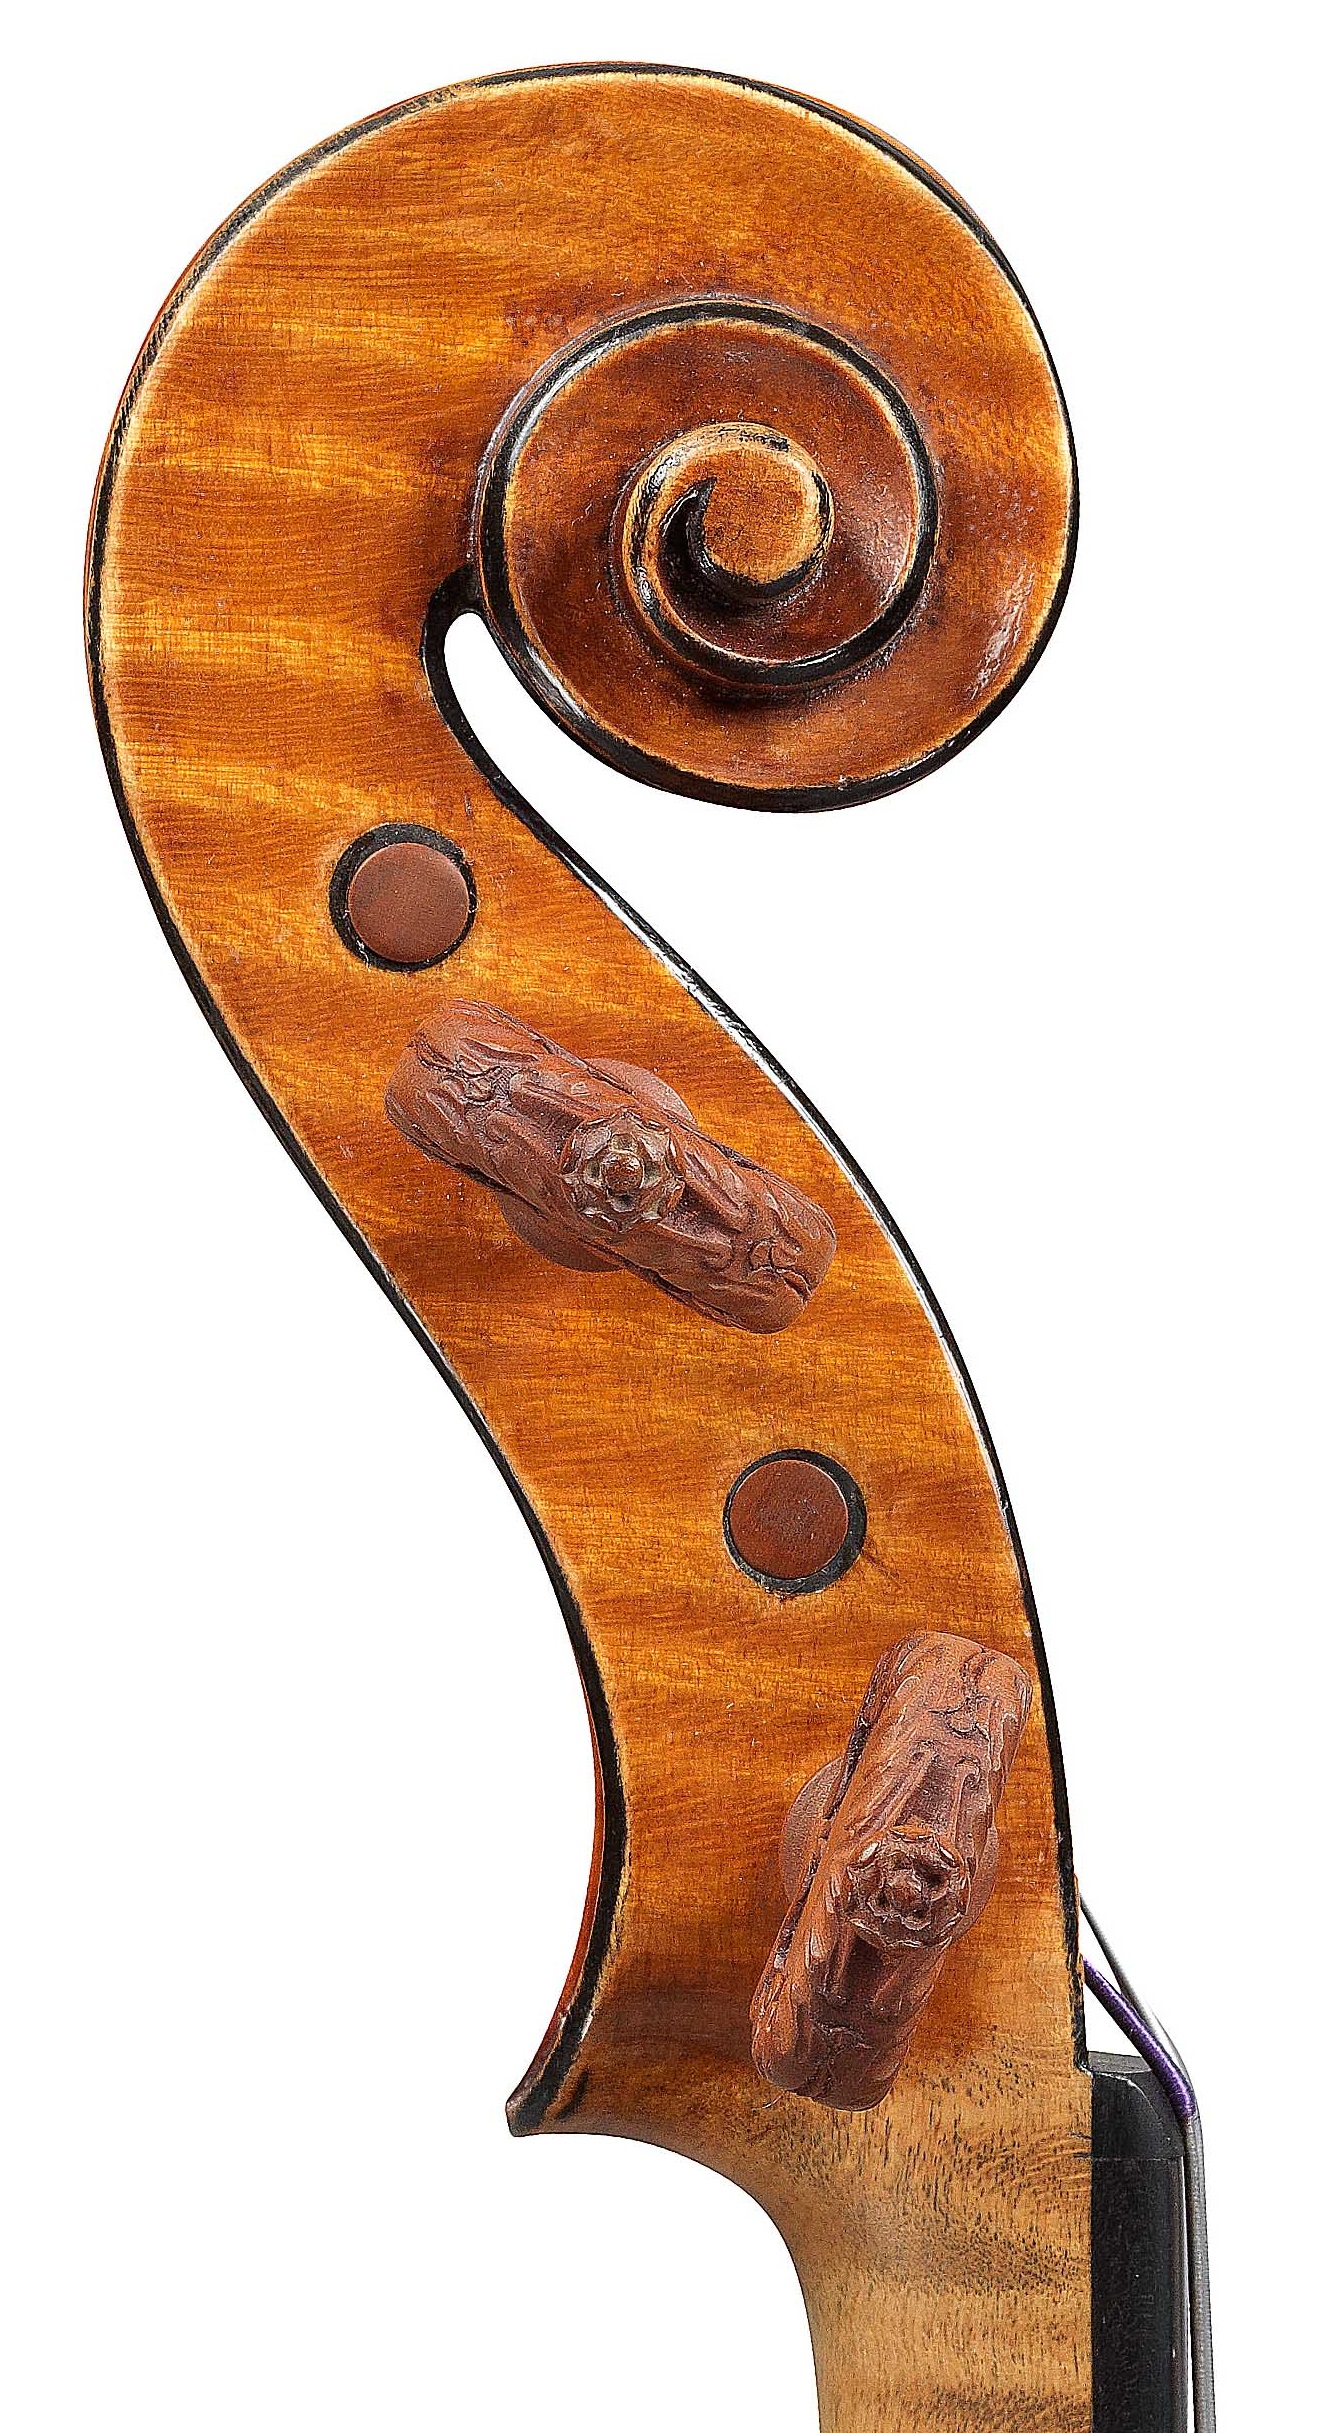 Scroll of a JB Vuillaume violin, dated 1856, exhibited by Ingles & Hayday at Sotheby's in 2012